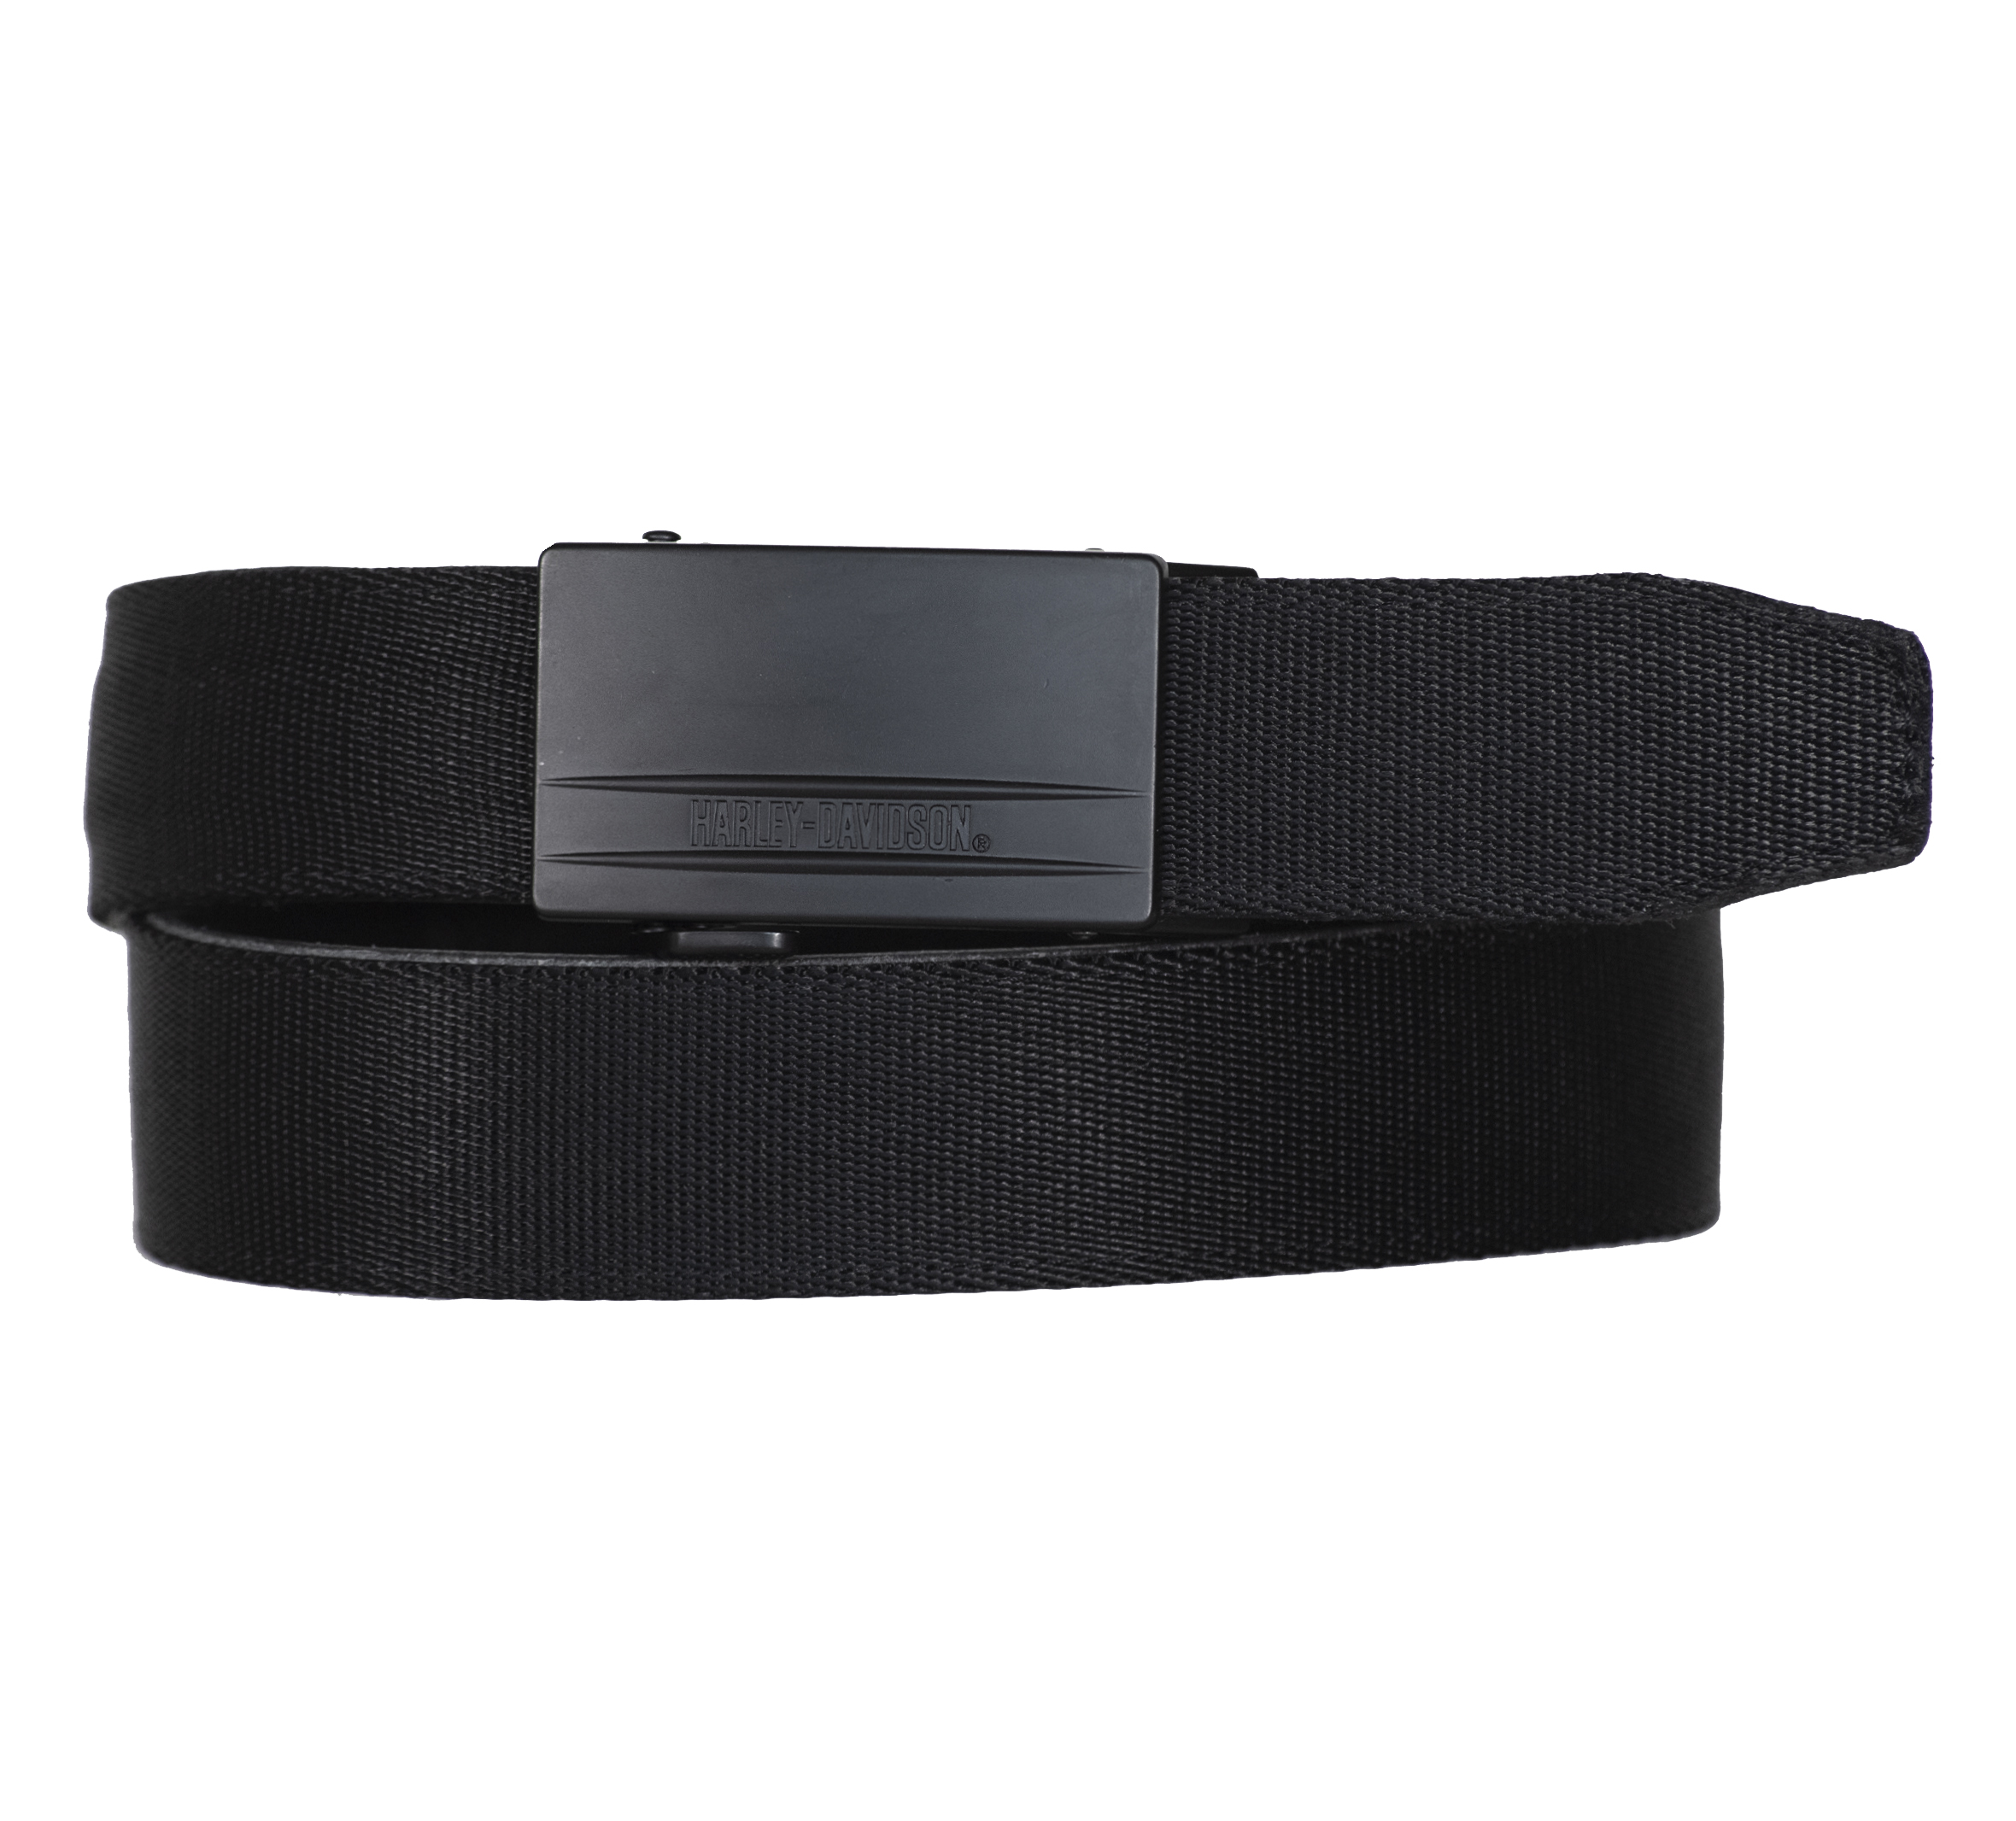 X-Large Mens Simple Yet Stylish Genuine Leather Belt Strap in Black